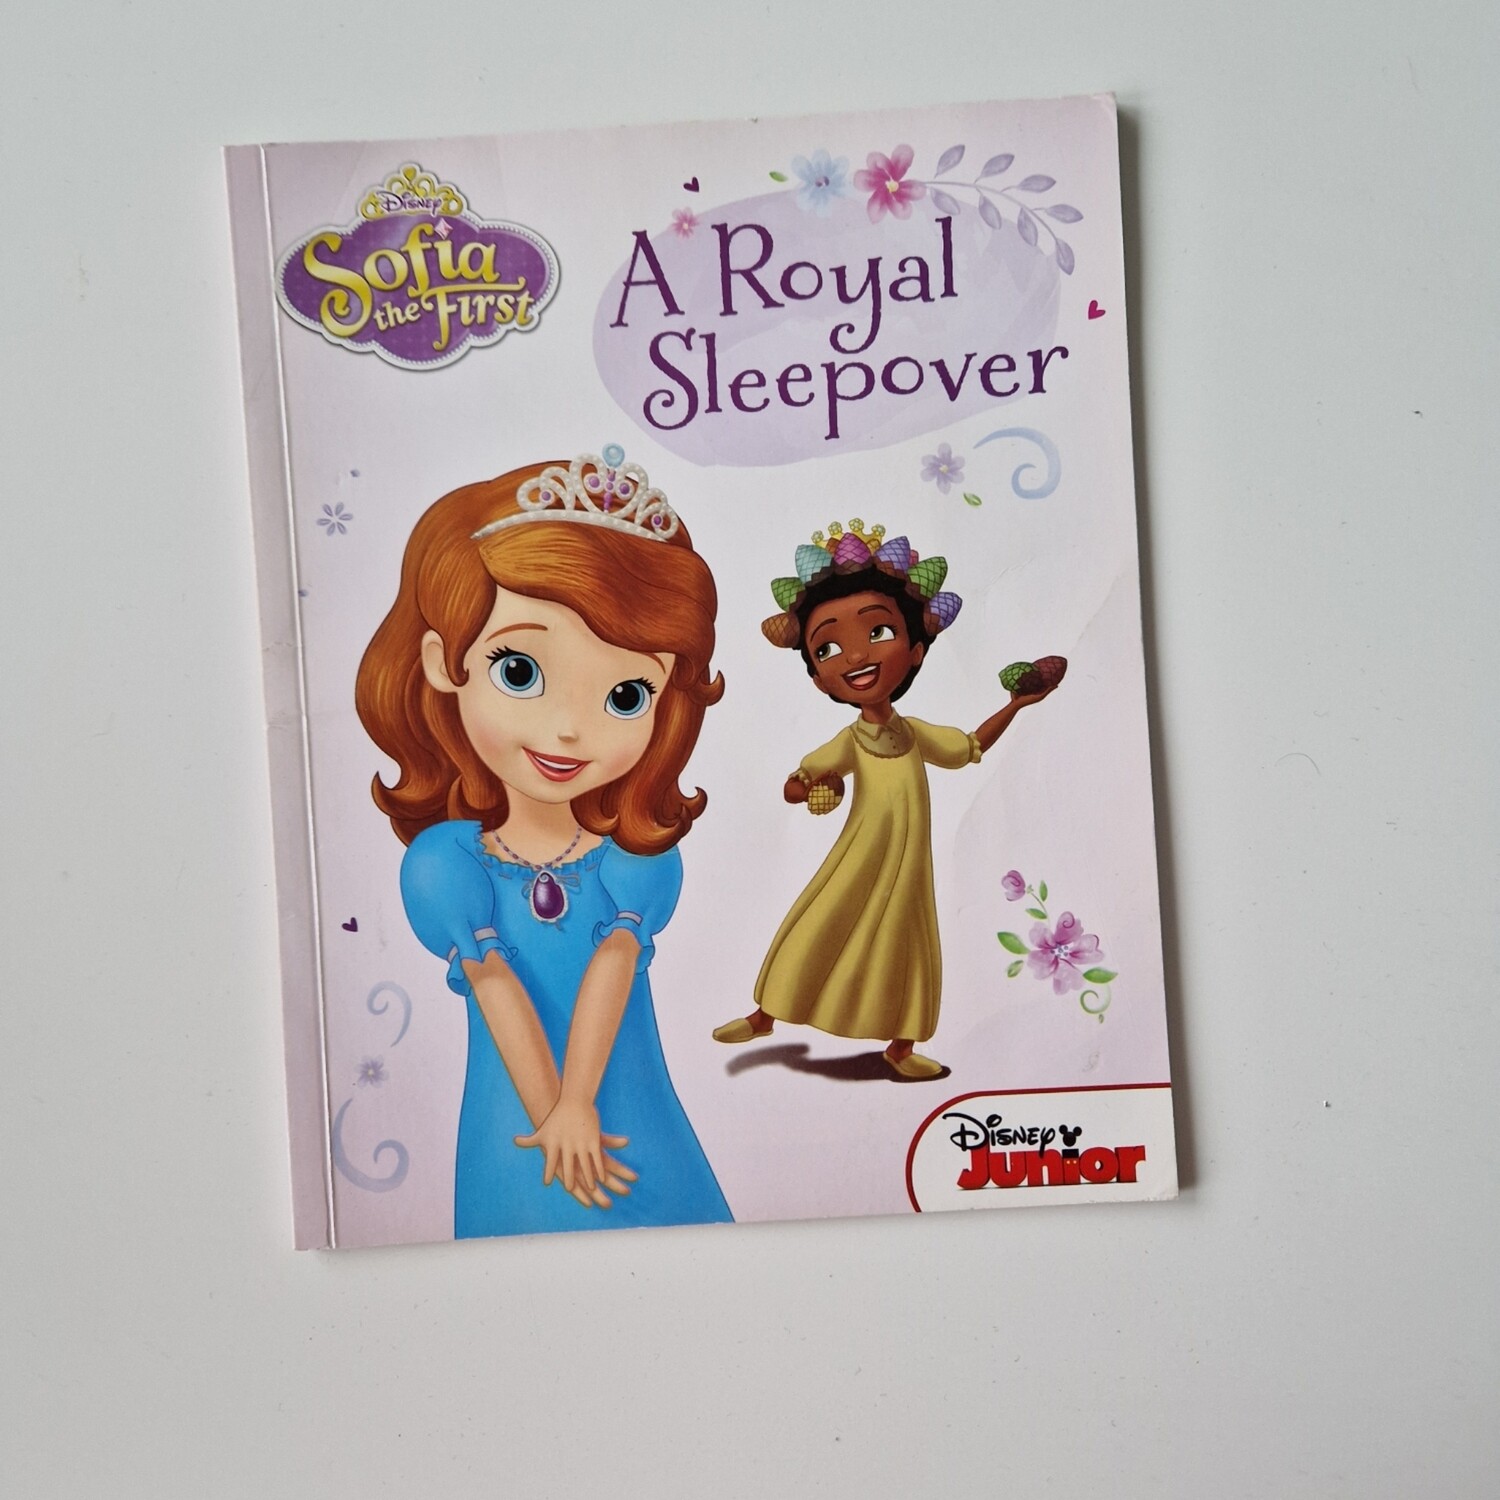 Sofia The First - A Royal Sleepover, made from a paperback book, comes with book corners